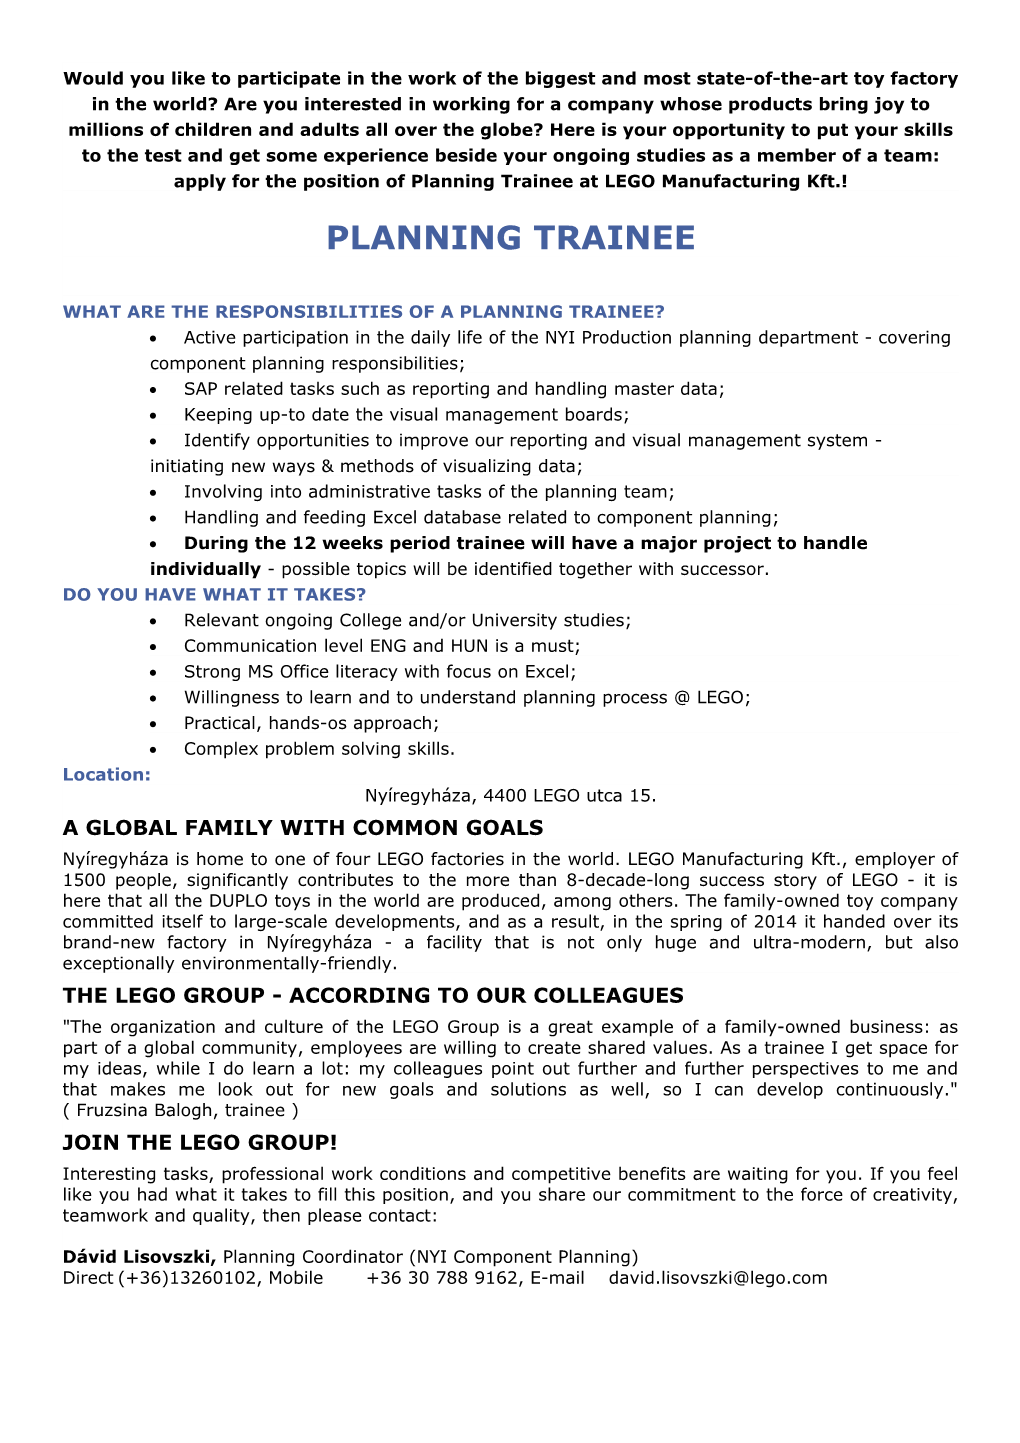 What Are the Responsibilities of a Planning Trainee?